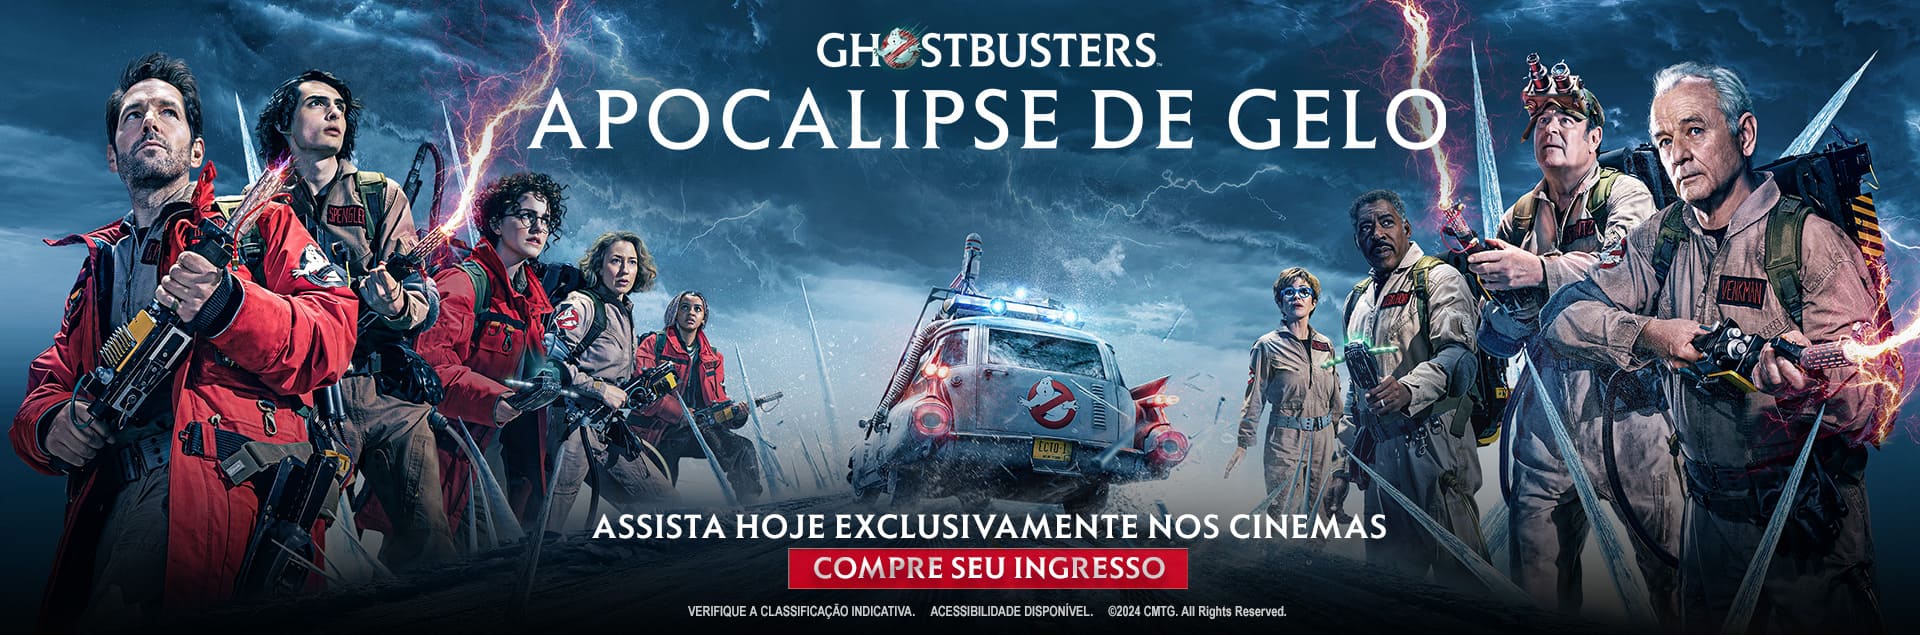 Ghostbusters: A